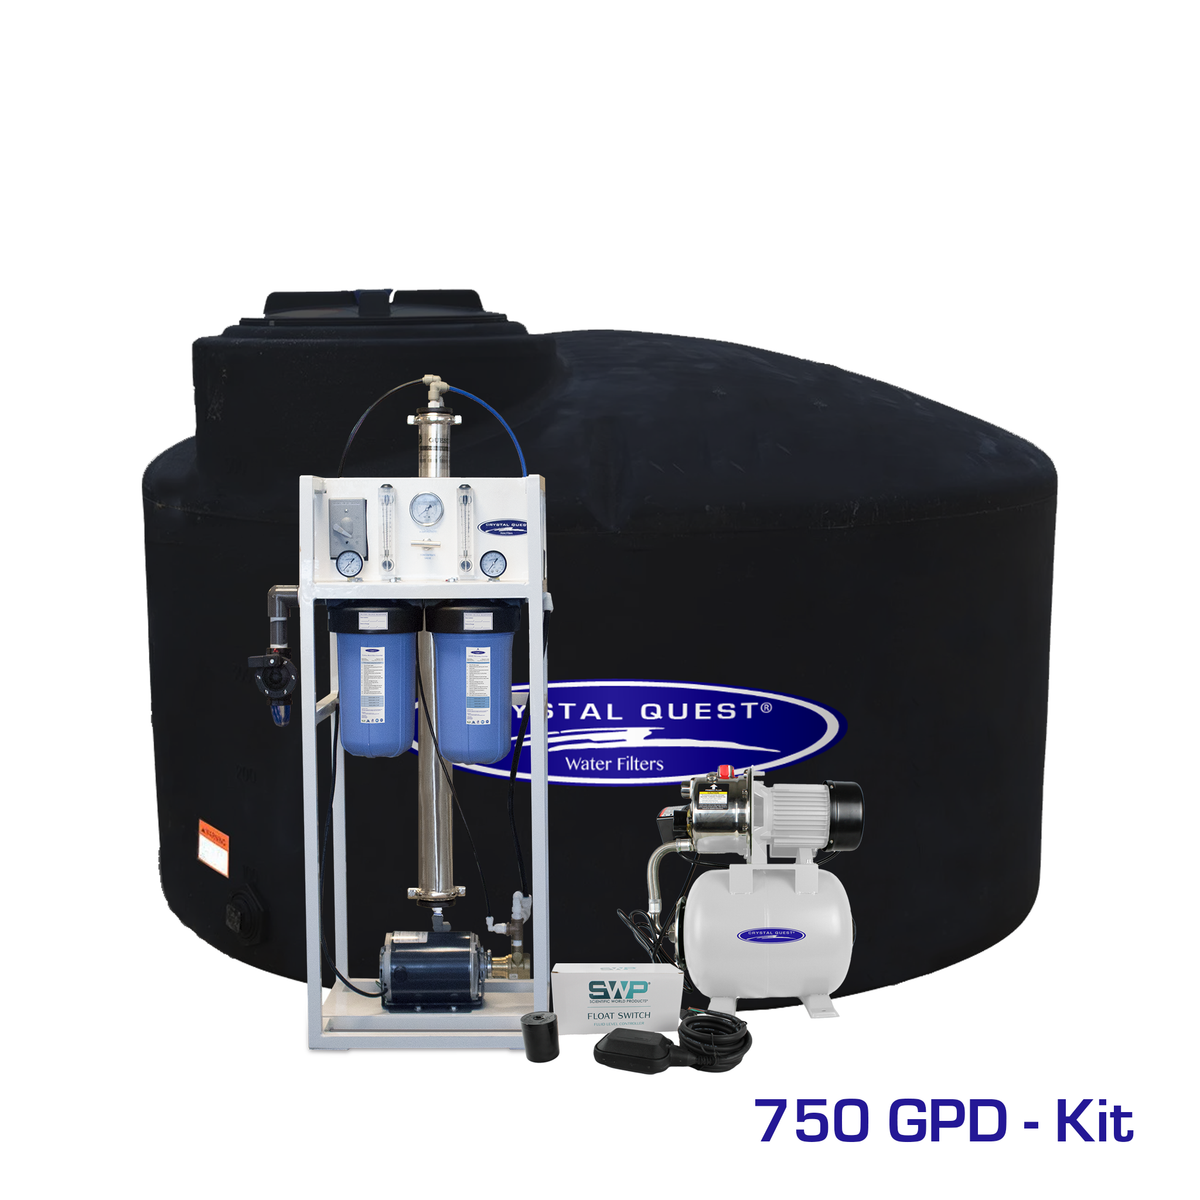 750 GPD / Add Storage Tank Kit (550 Gal) Commercial Mid-Flow Reverse Osmosis System (500-7000 GPD) - Commercial - Crystal Quest